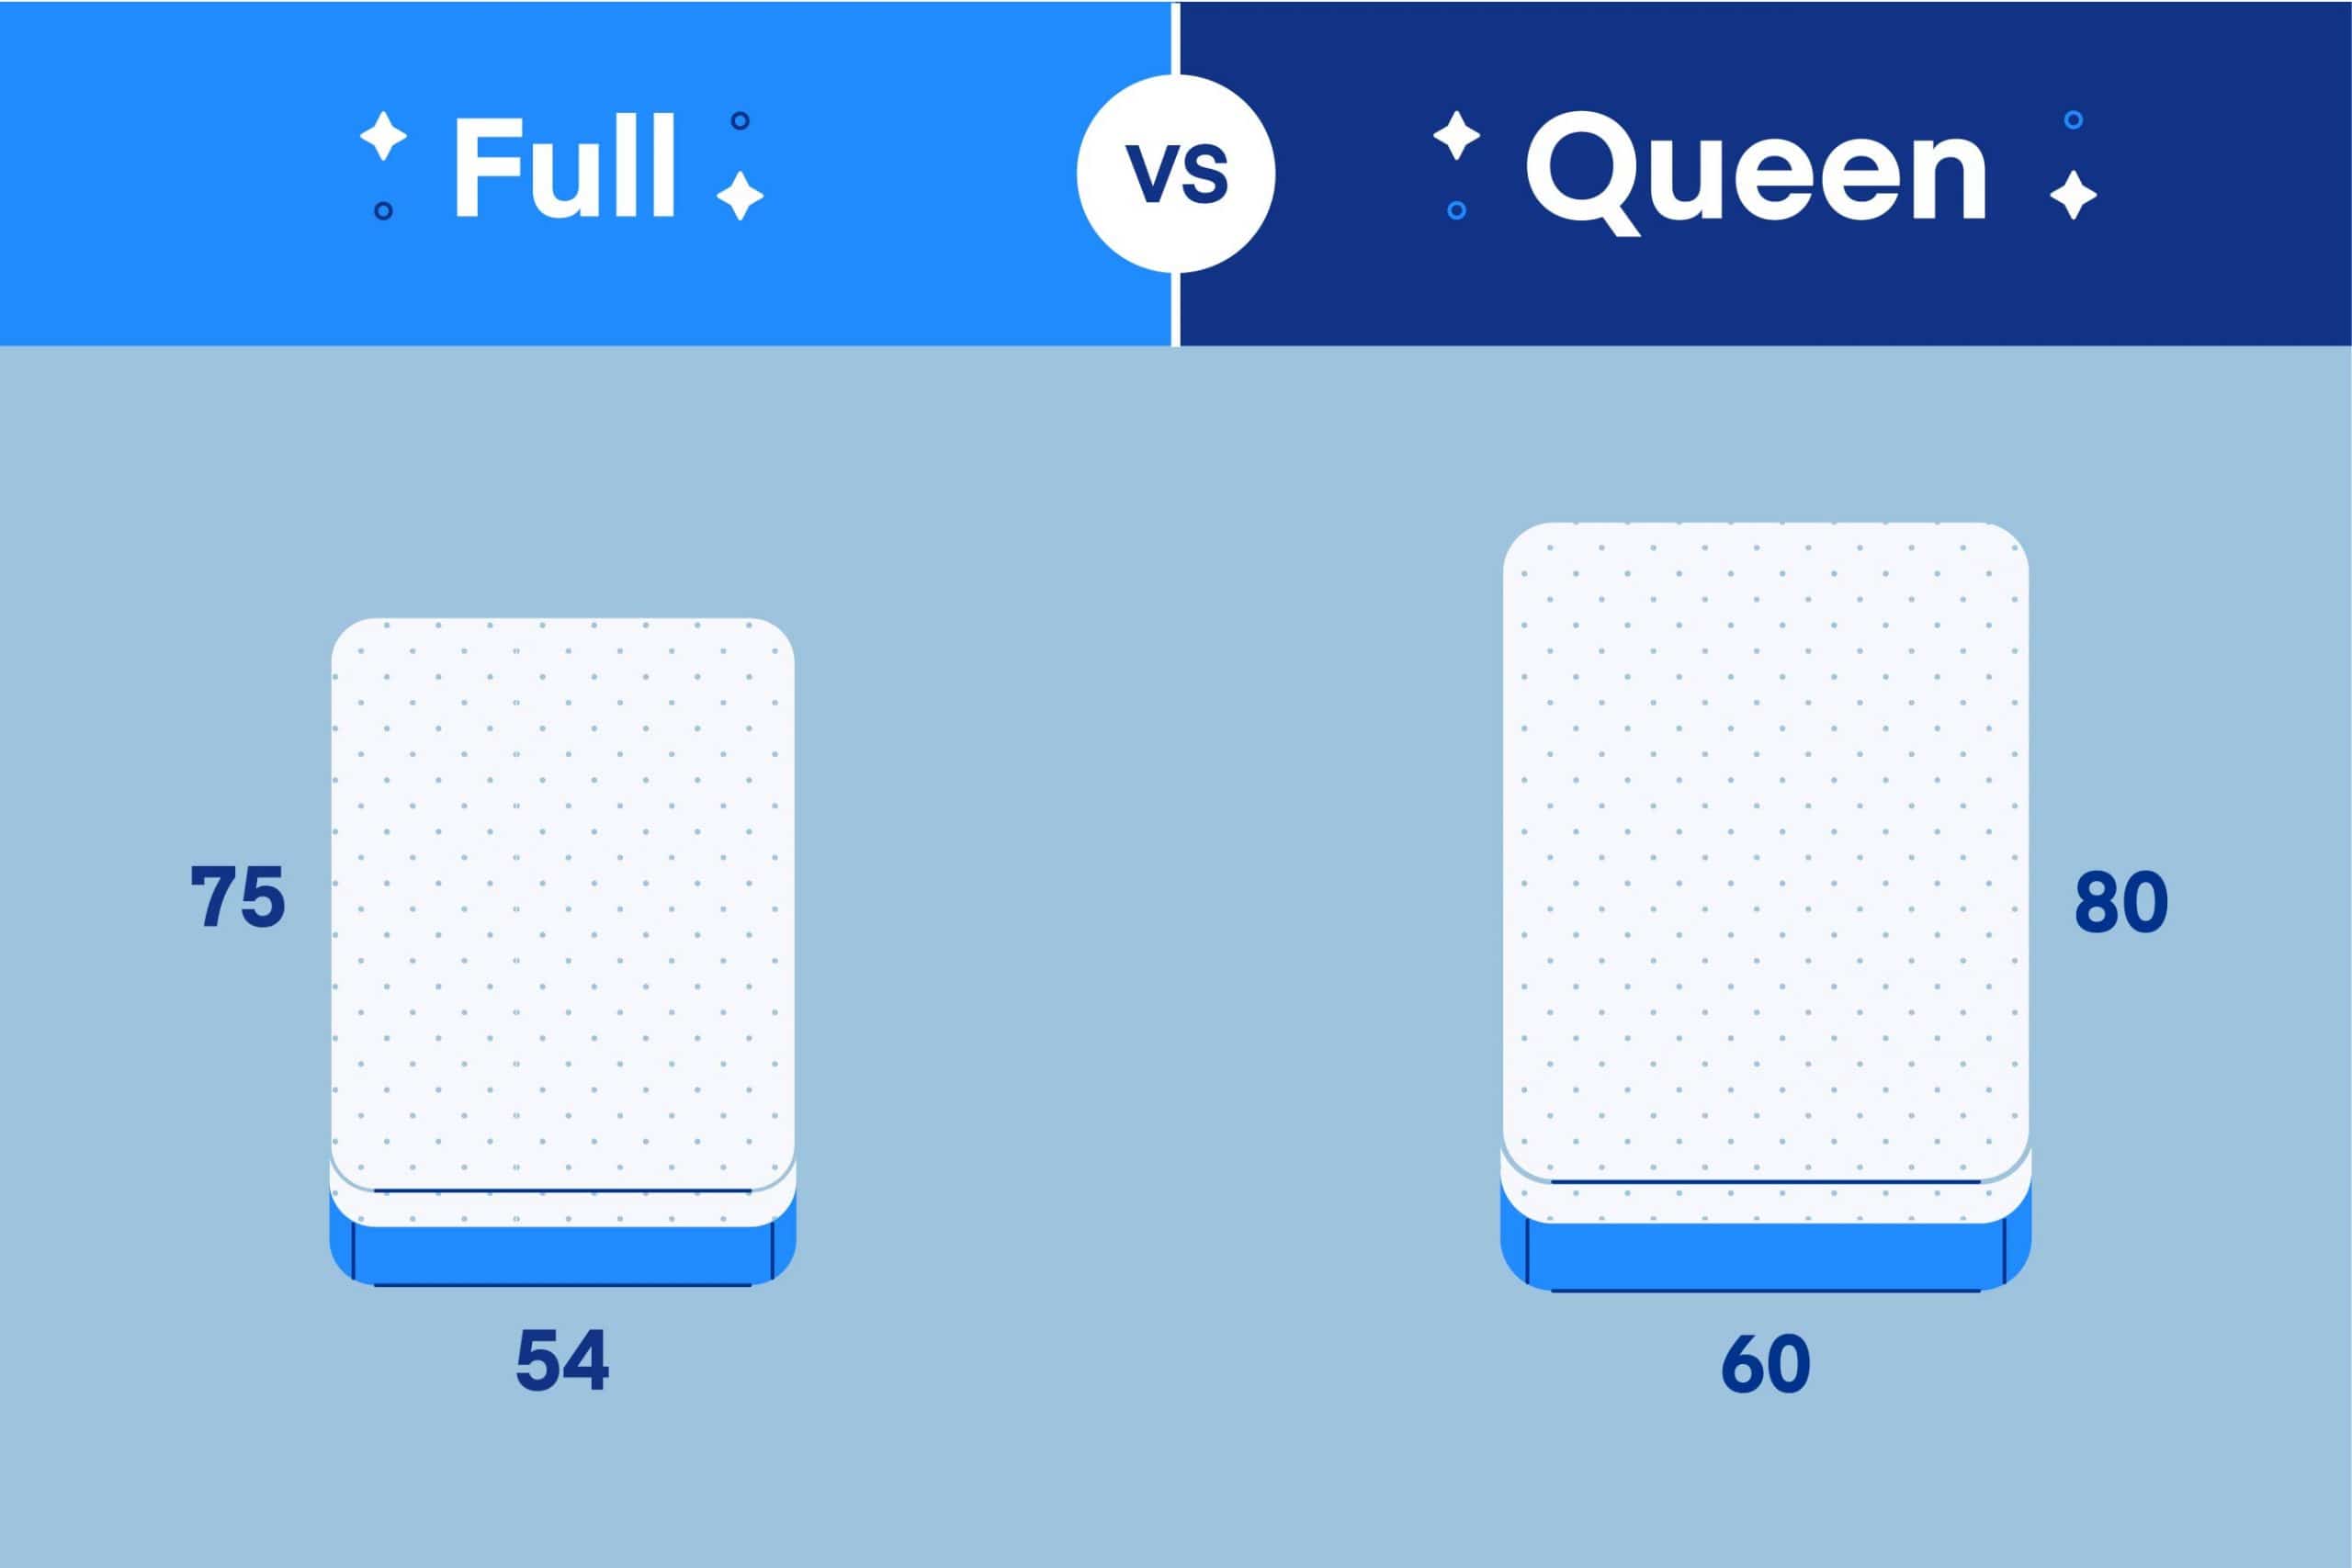 How Big Is A Full Mattress Compared To A Queen?